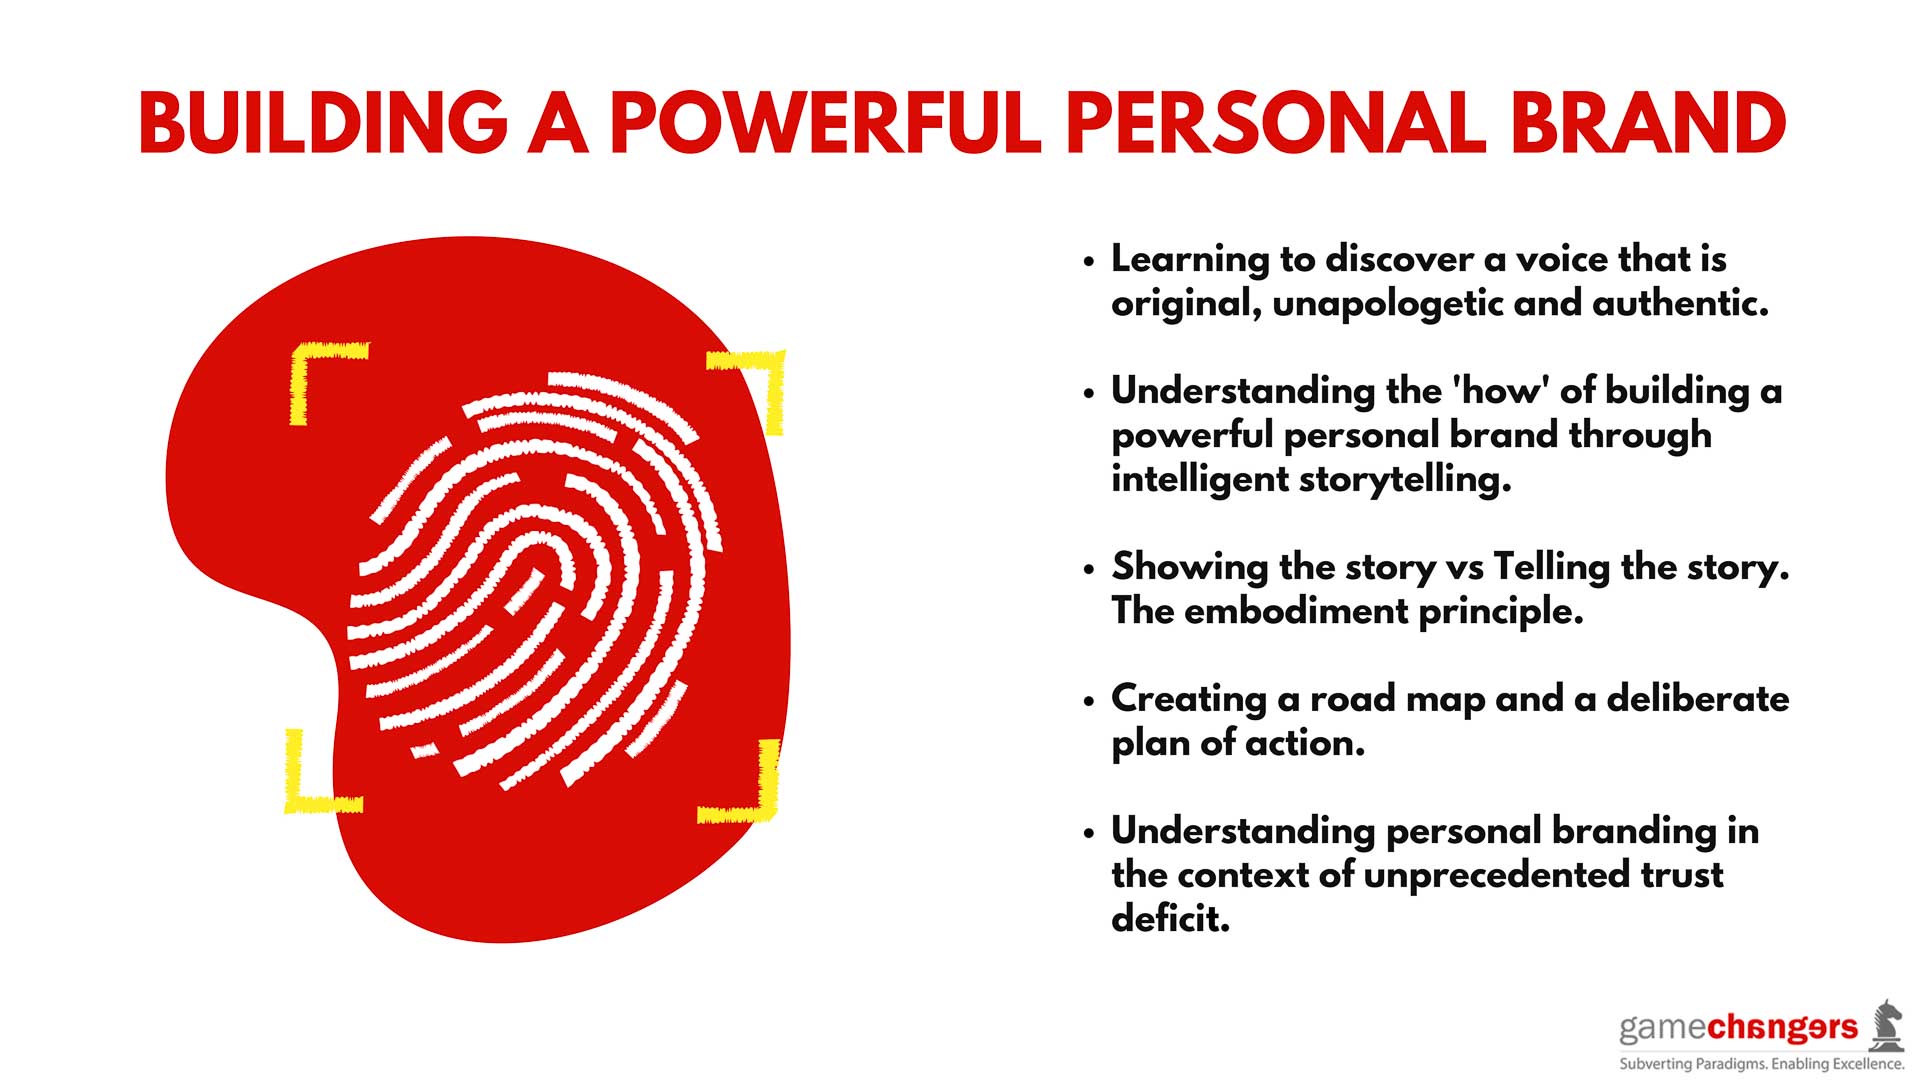 “eil-building-a-powerful-personal-brand-11”